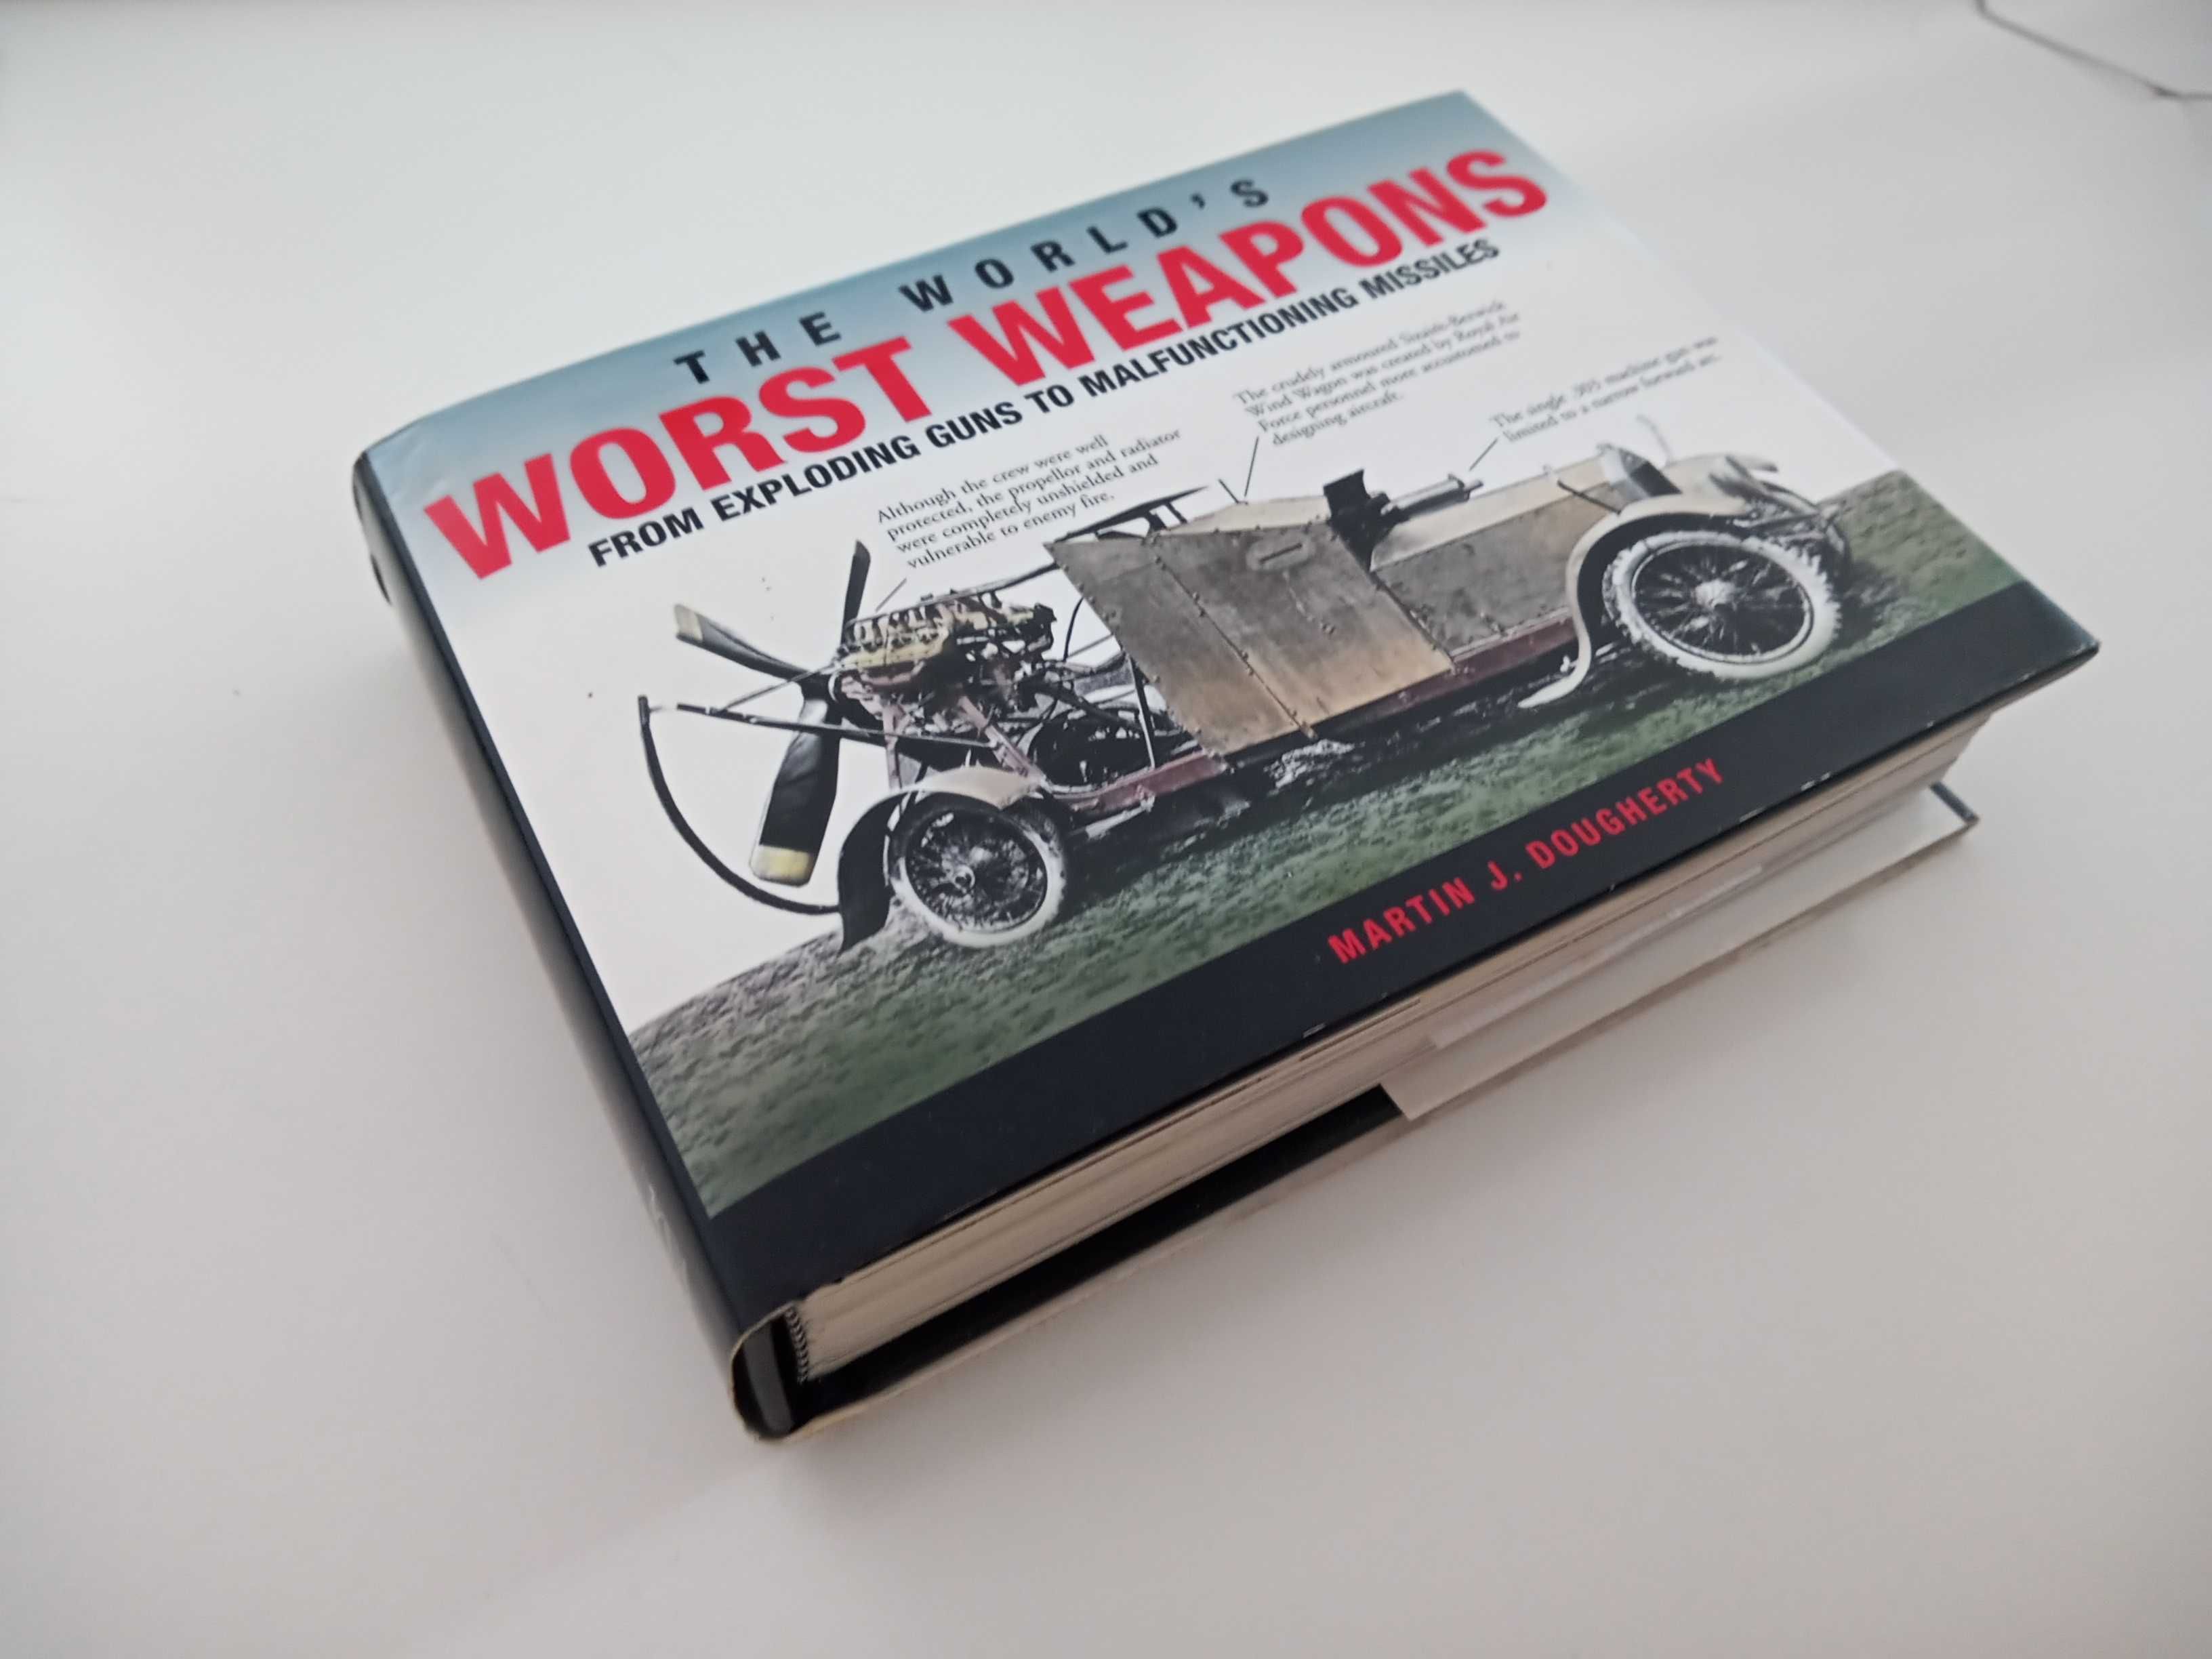 As Piores Armas |  The worst weapons